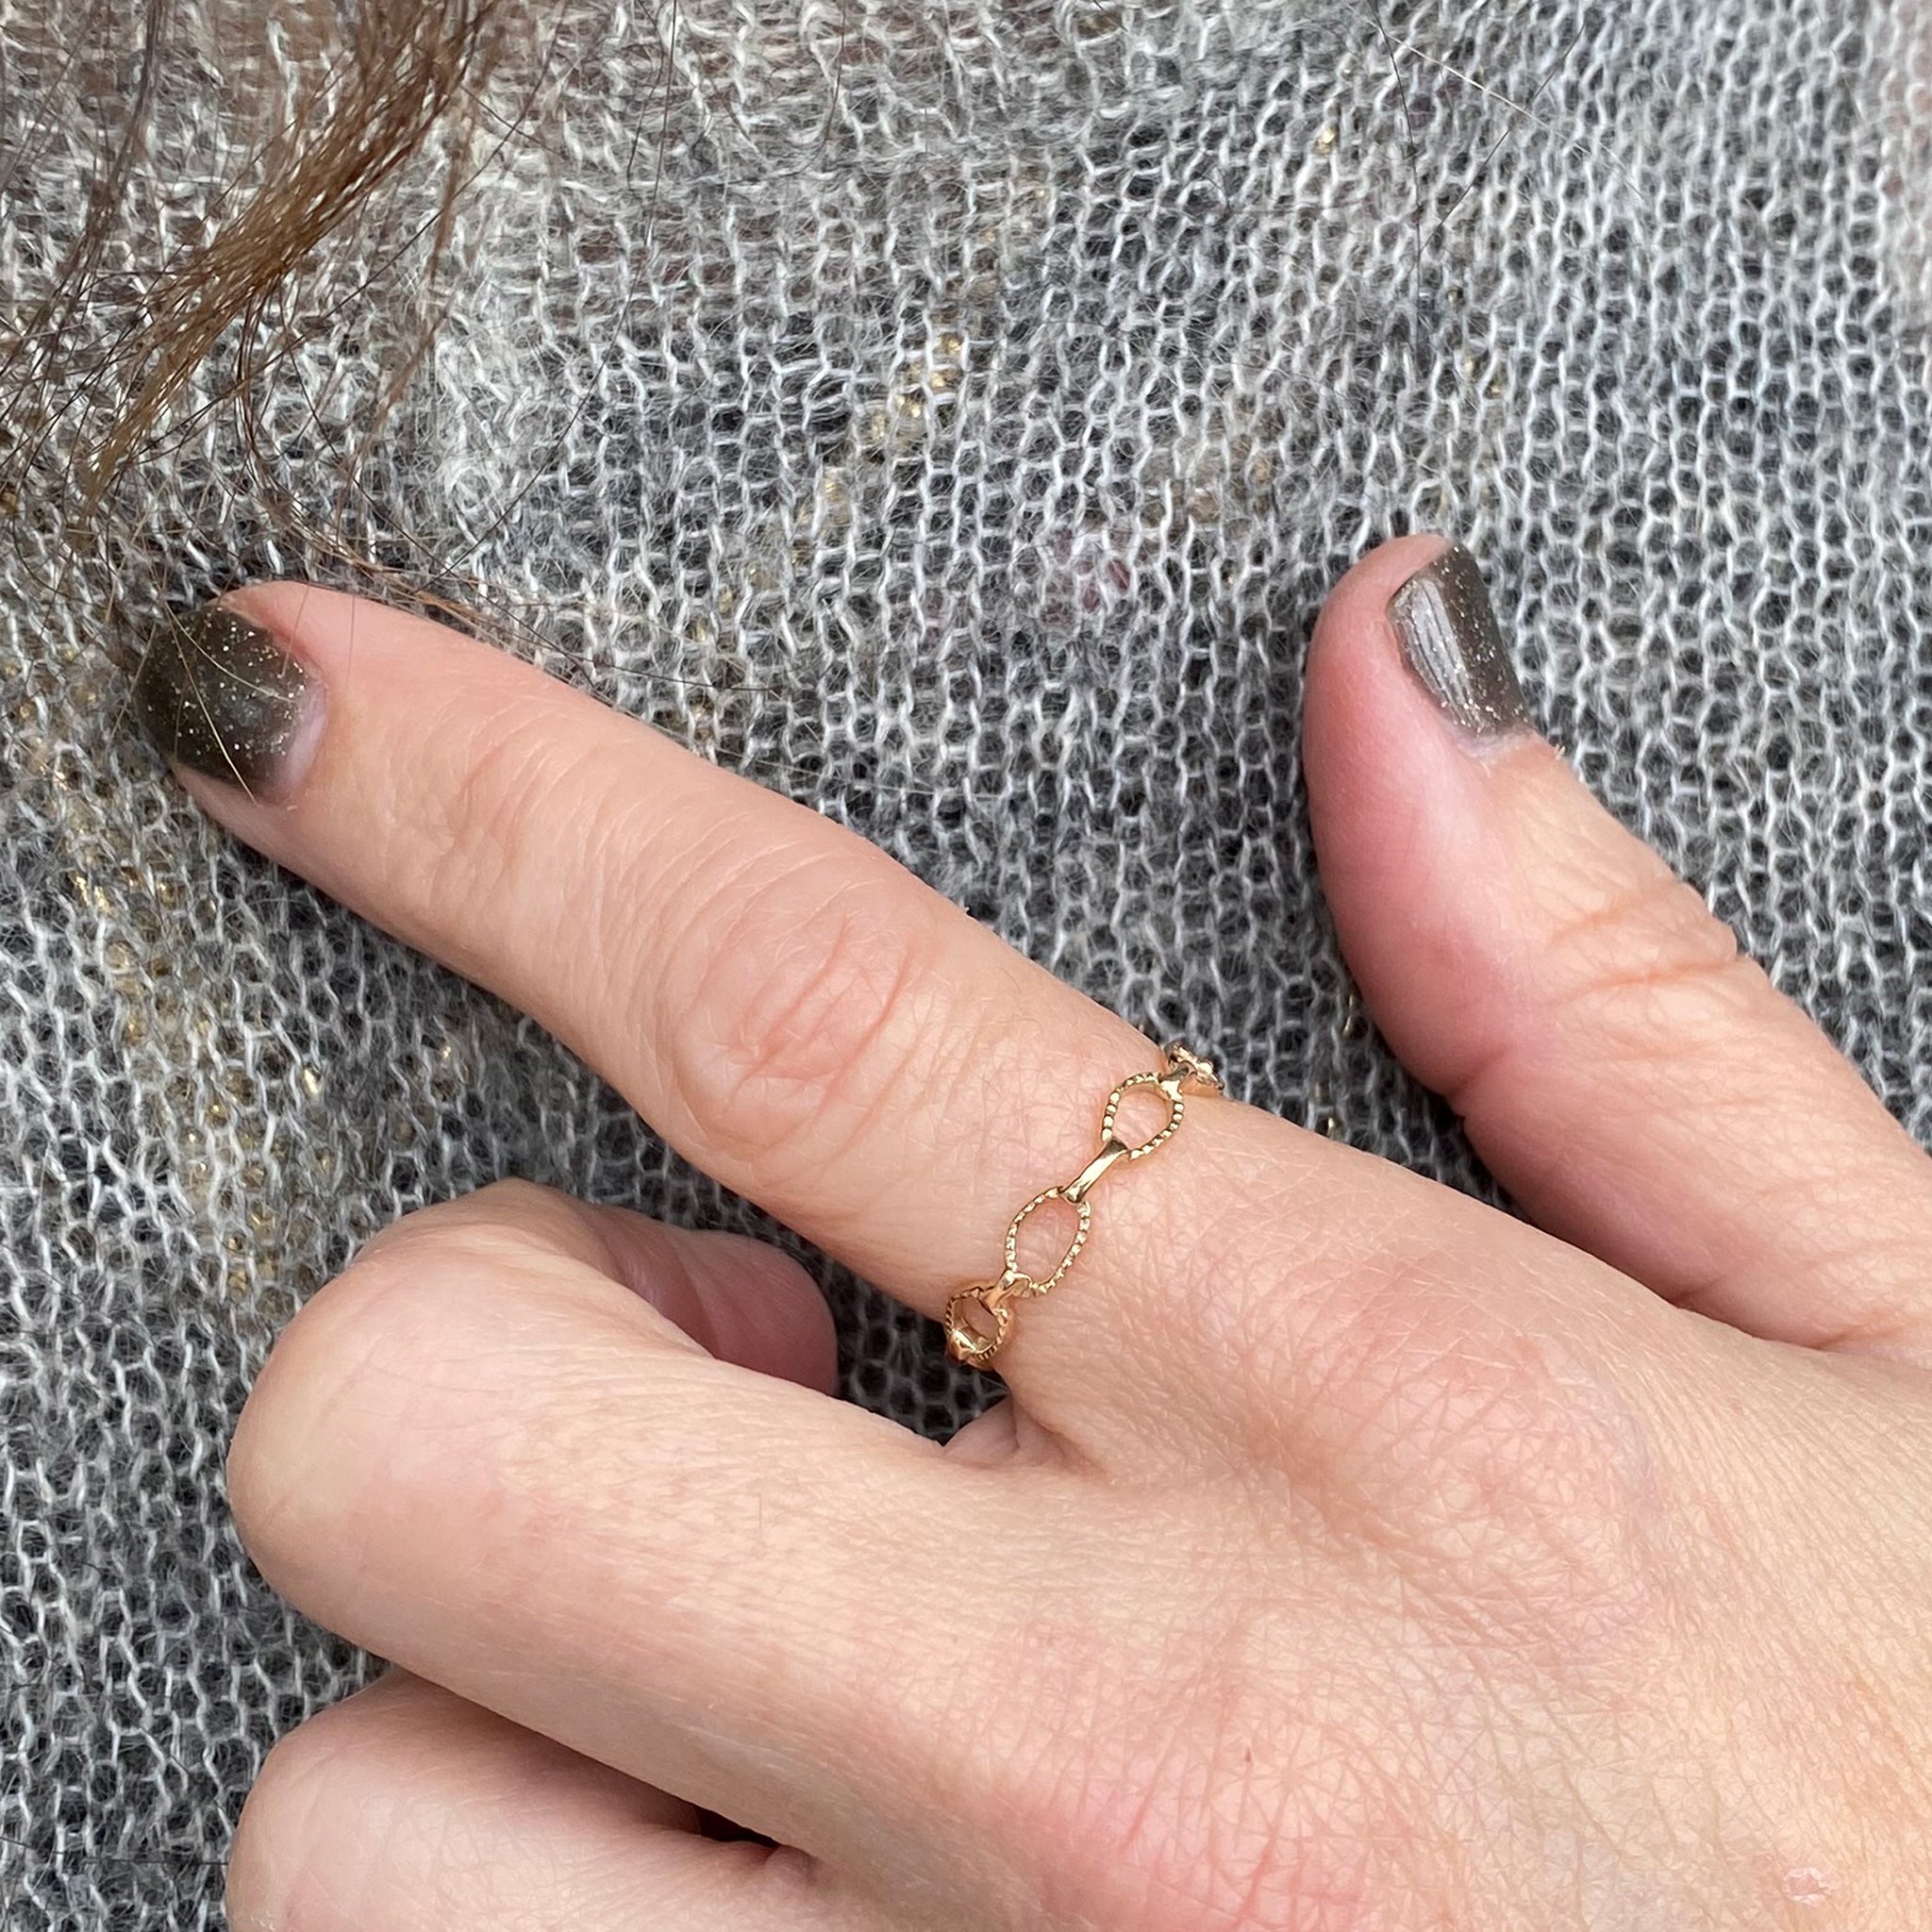 Rusty Thought Jewelry | A Mano Online – A Mano: Luxury artisan